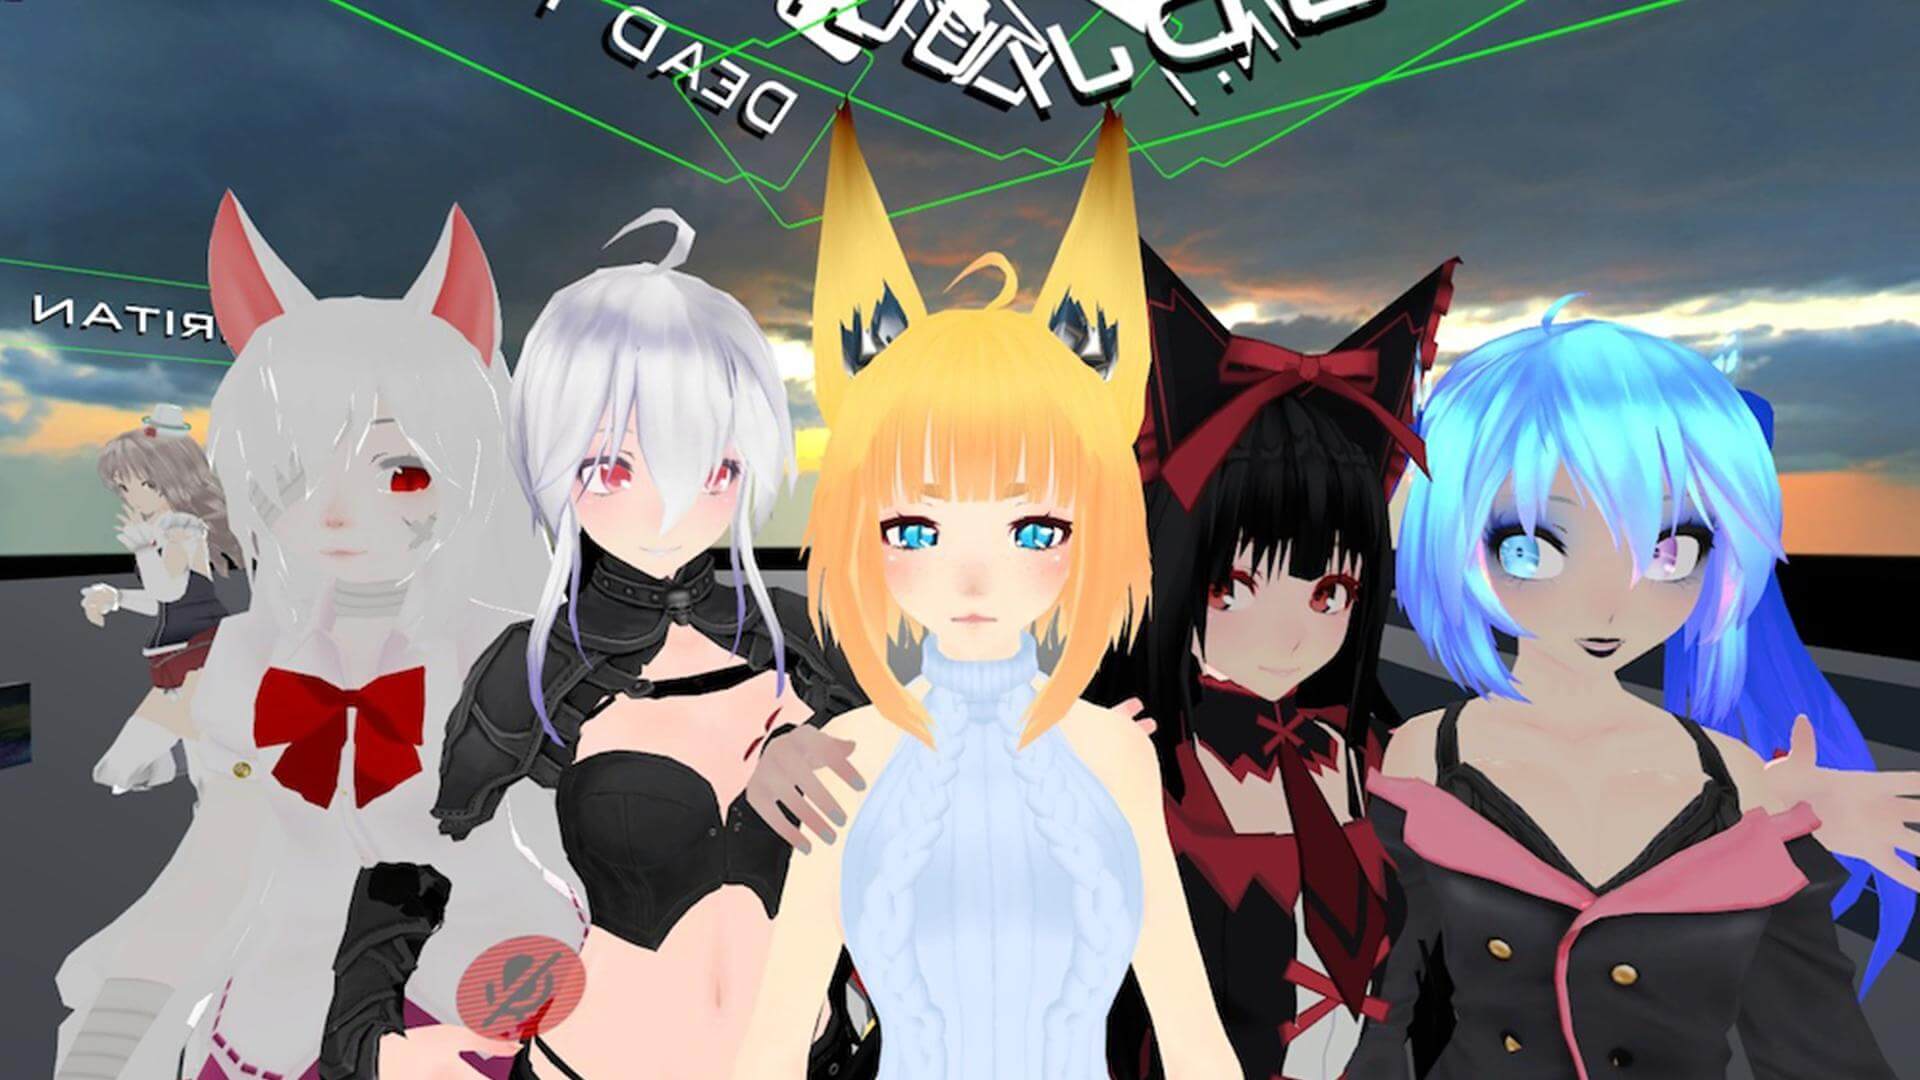 How To Change Your Avatar in VRChat